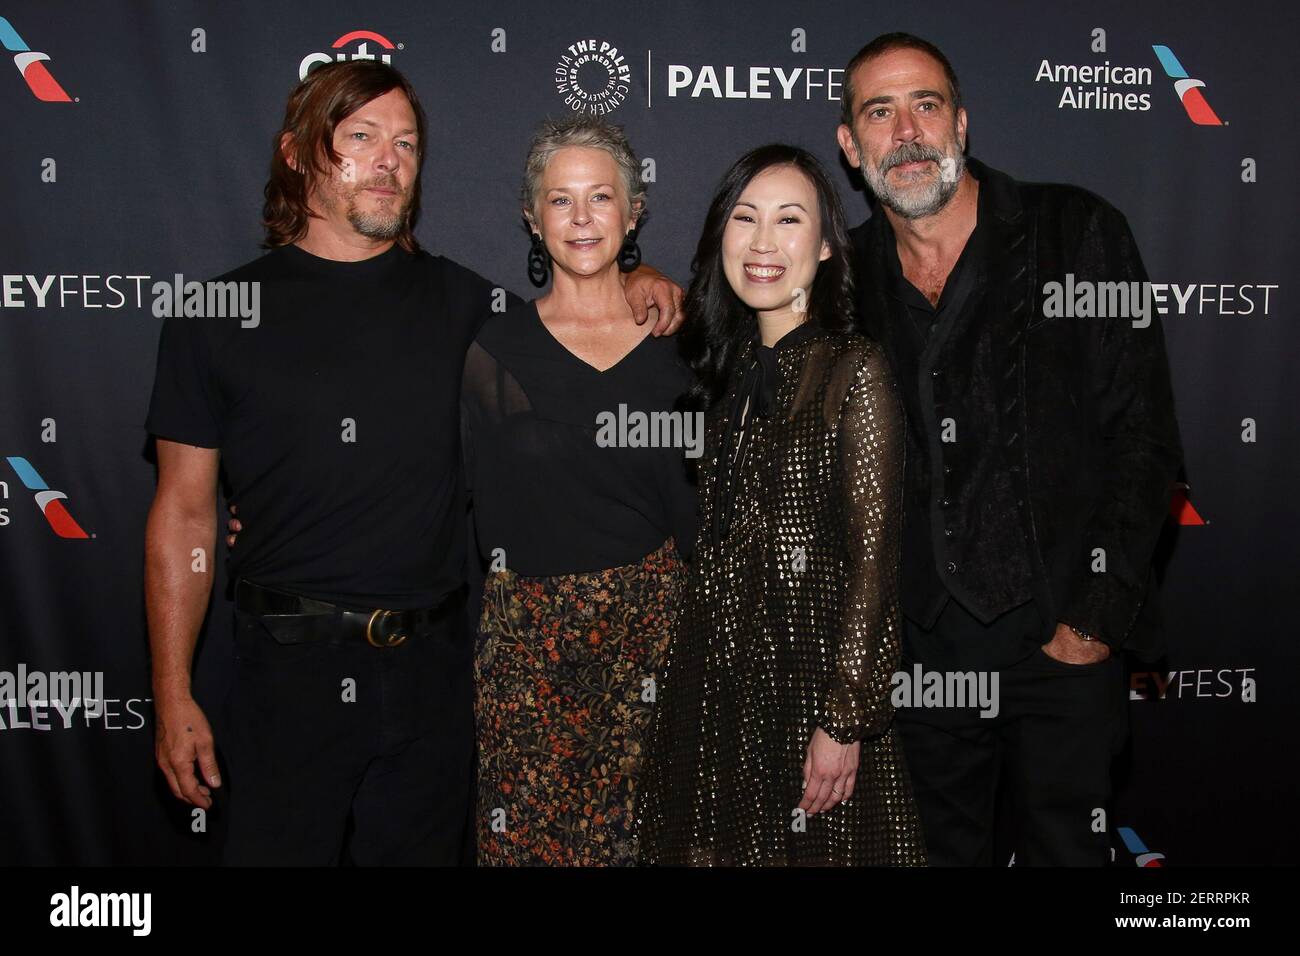 Norman Reedus, Melissa McBride, Angela Kang and Jeffrey Dean Morgan attend  The Walking Dead at Paley Fest New York 2018 at the Paley Center for Media  in New York, NY on October